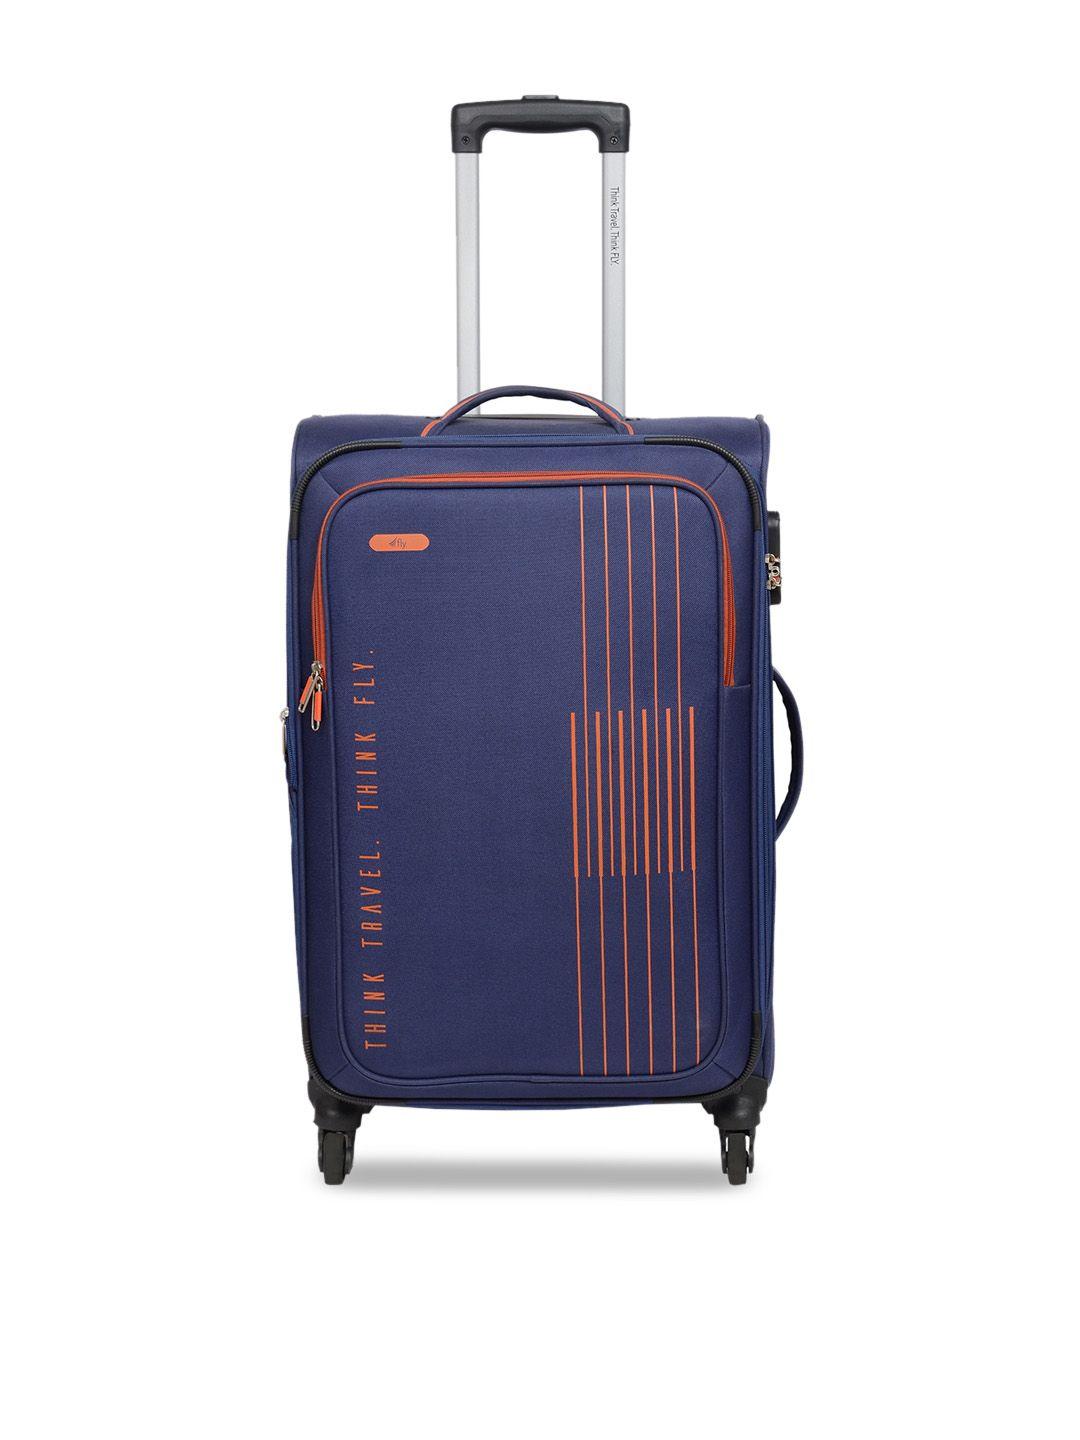 fly printed trolley suitcase